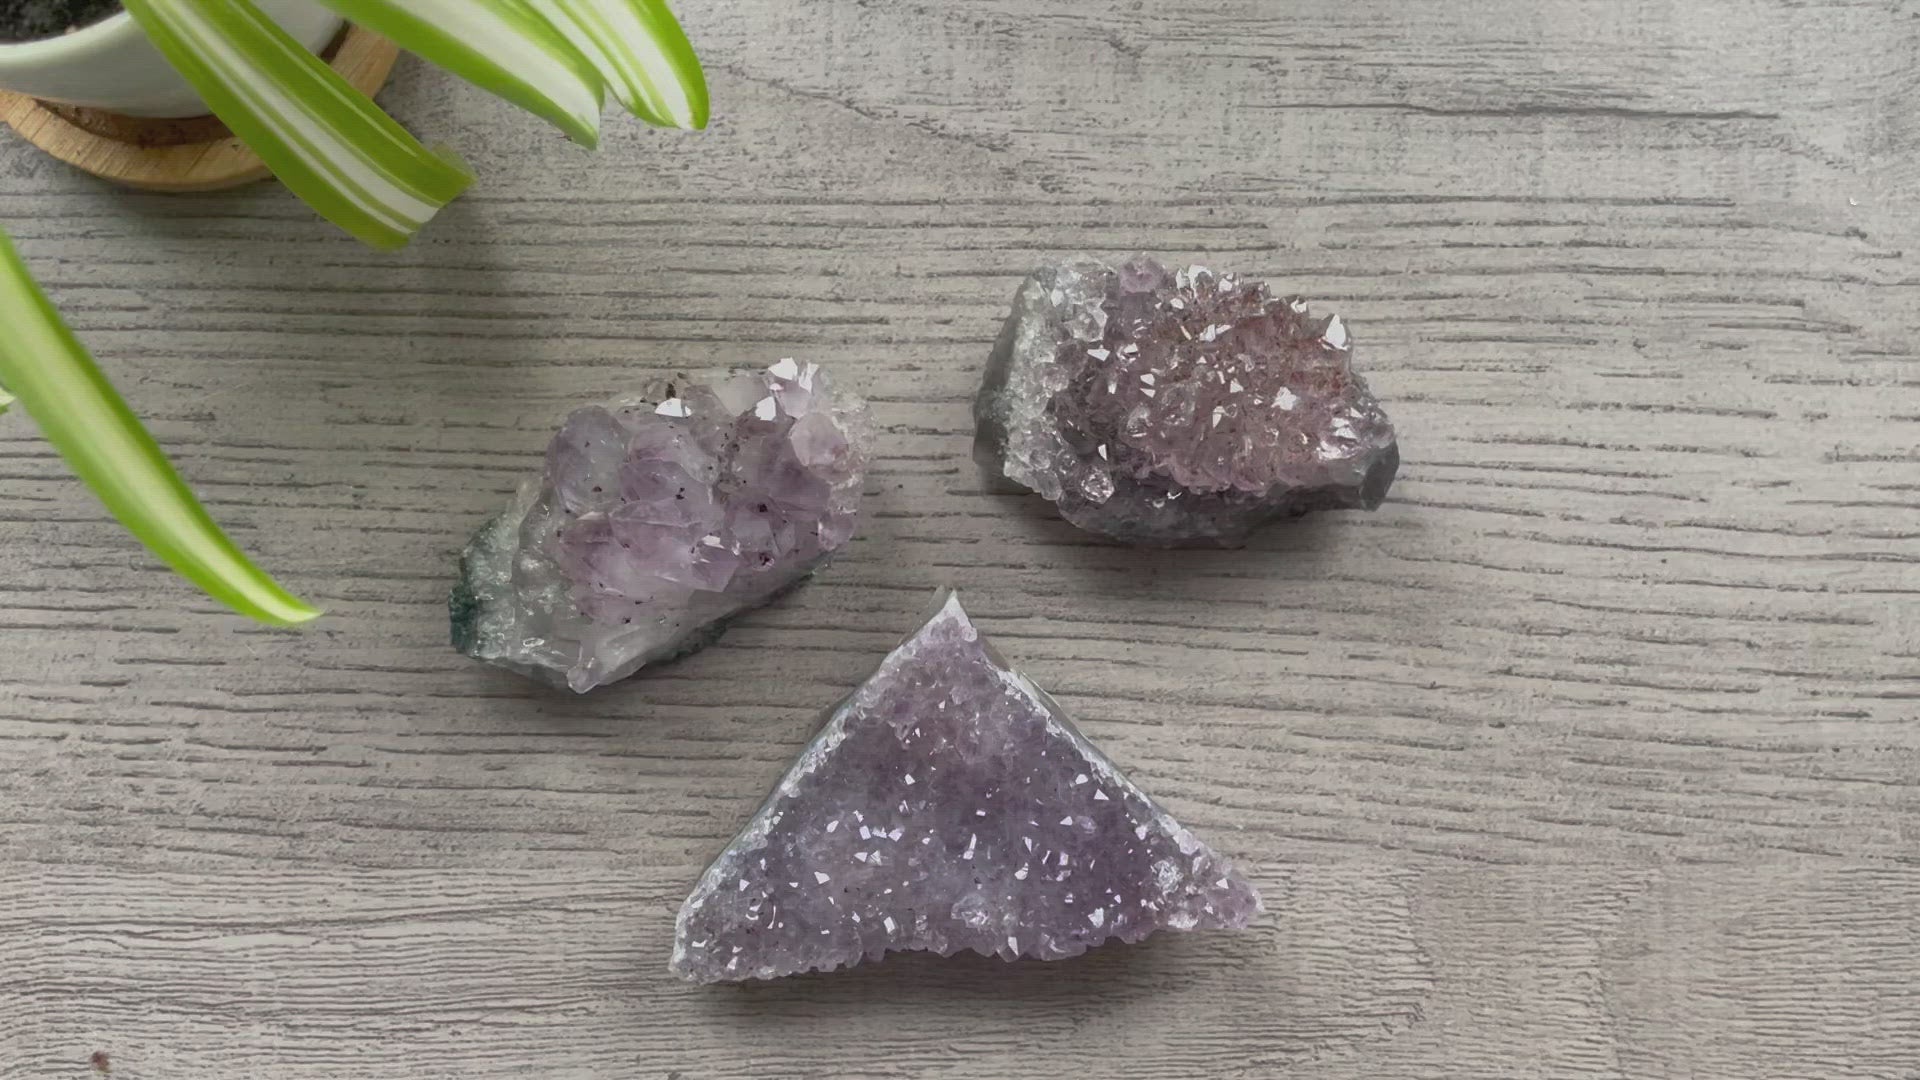 The image shows several chunks of raw amethyst crystals arranged on a flat surface. The crystals vary in size and are characterized by their violet to deep purple color. 